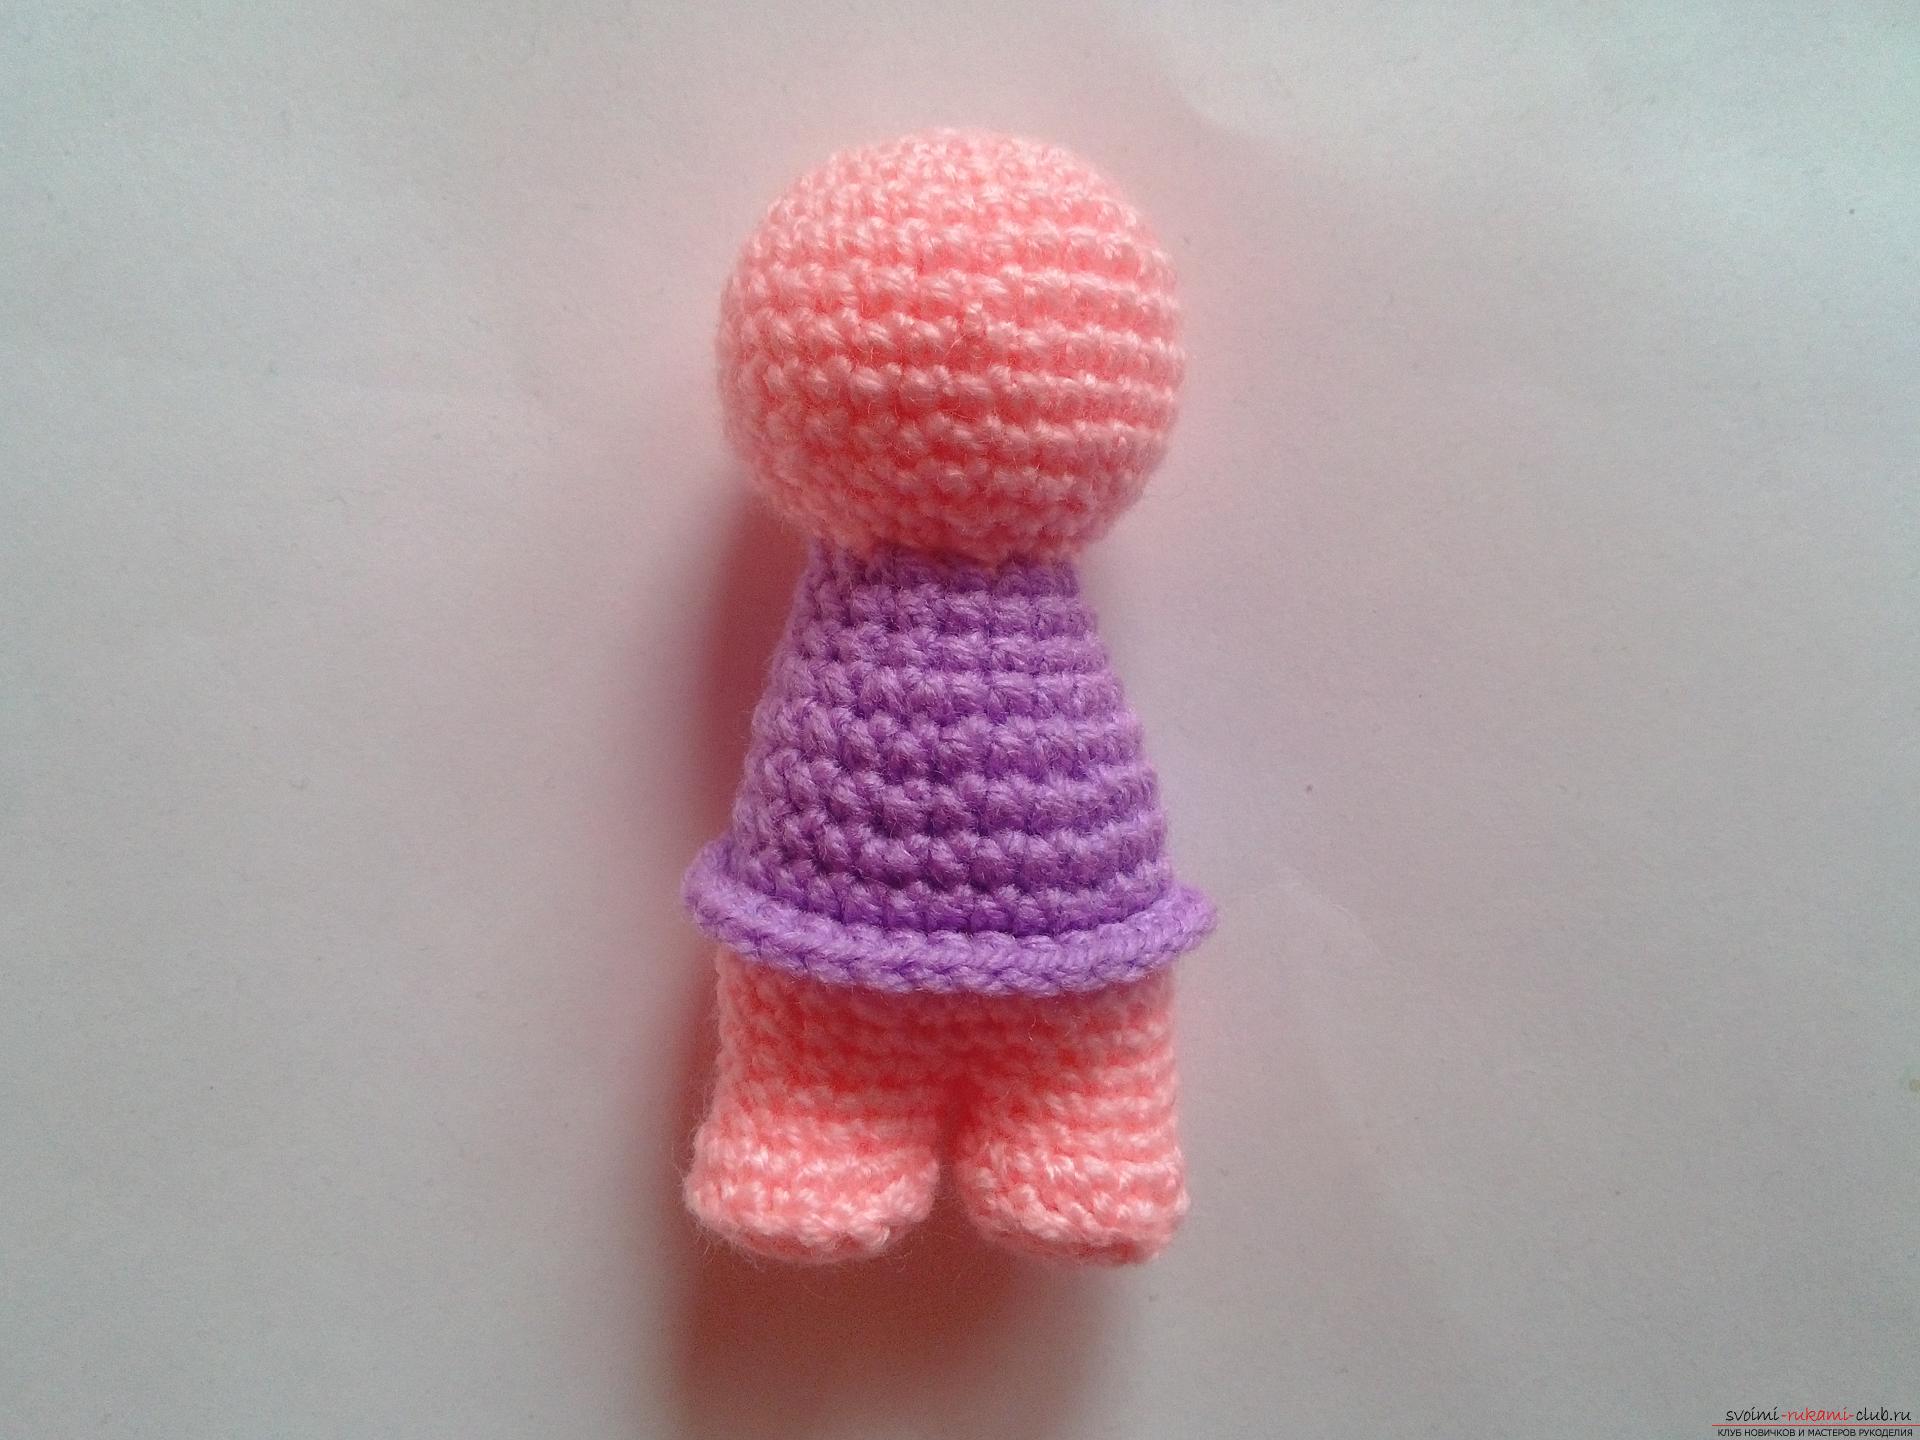 A master class with a photo and a step-by-step description will teach how to tie an amigurumi crochet toy. Photo №5